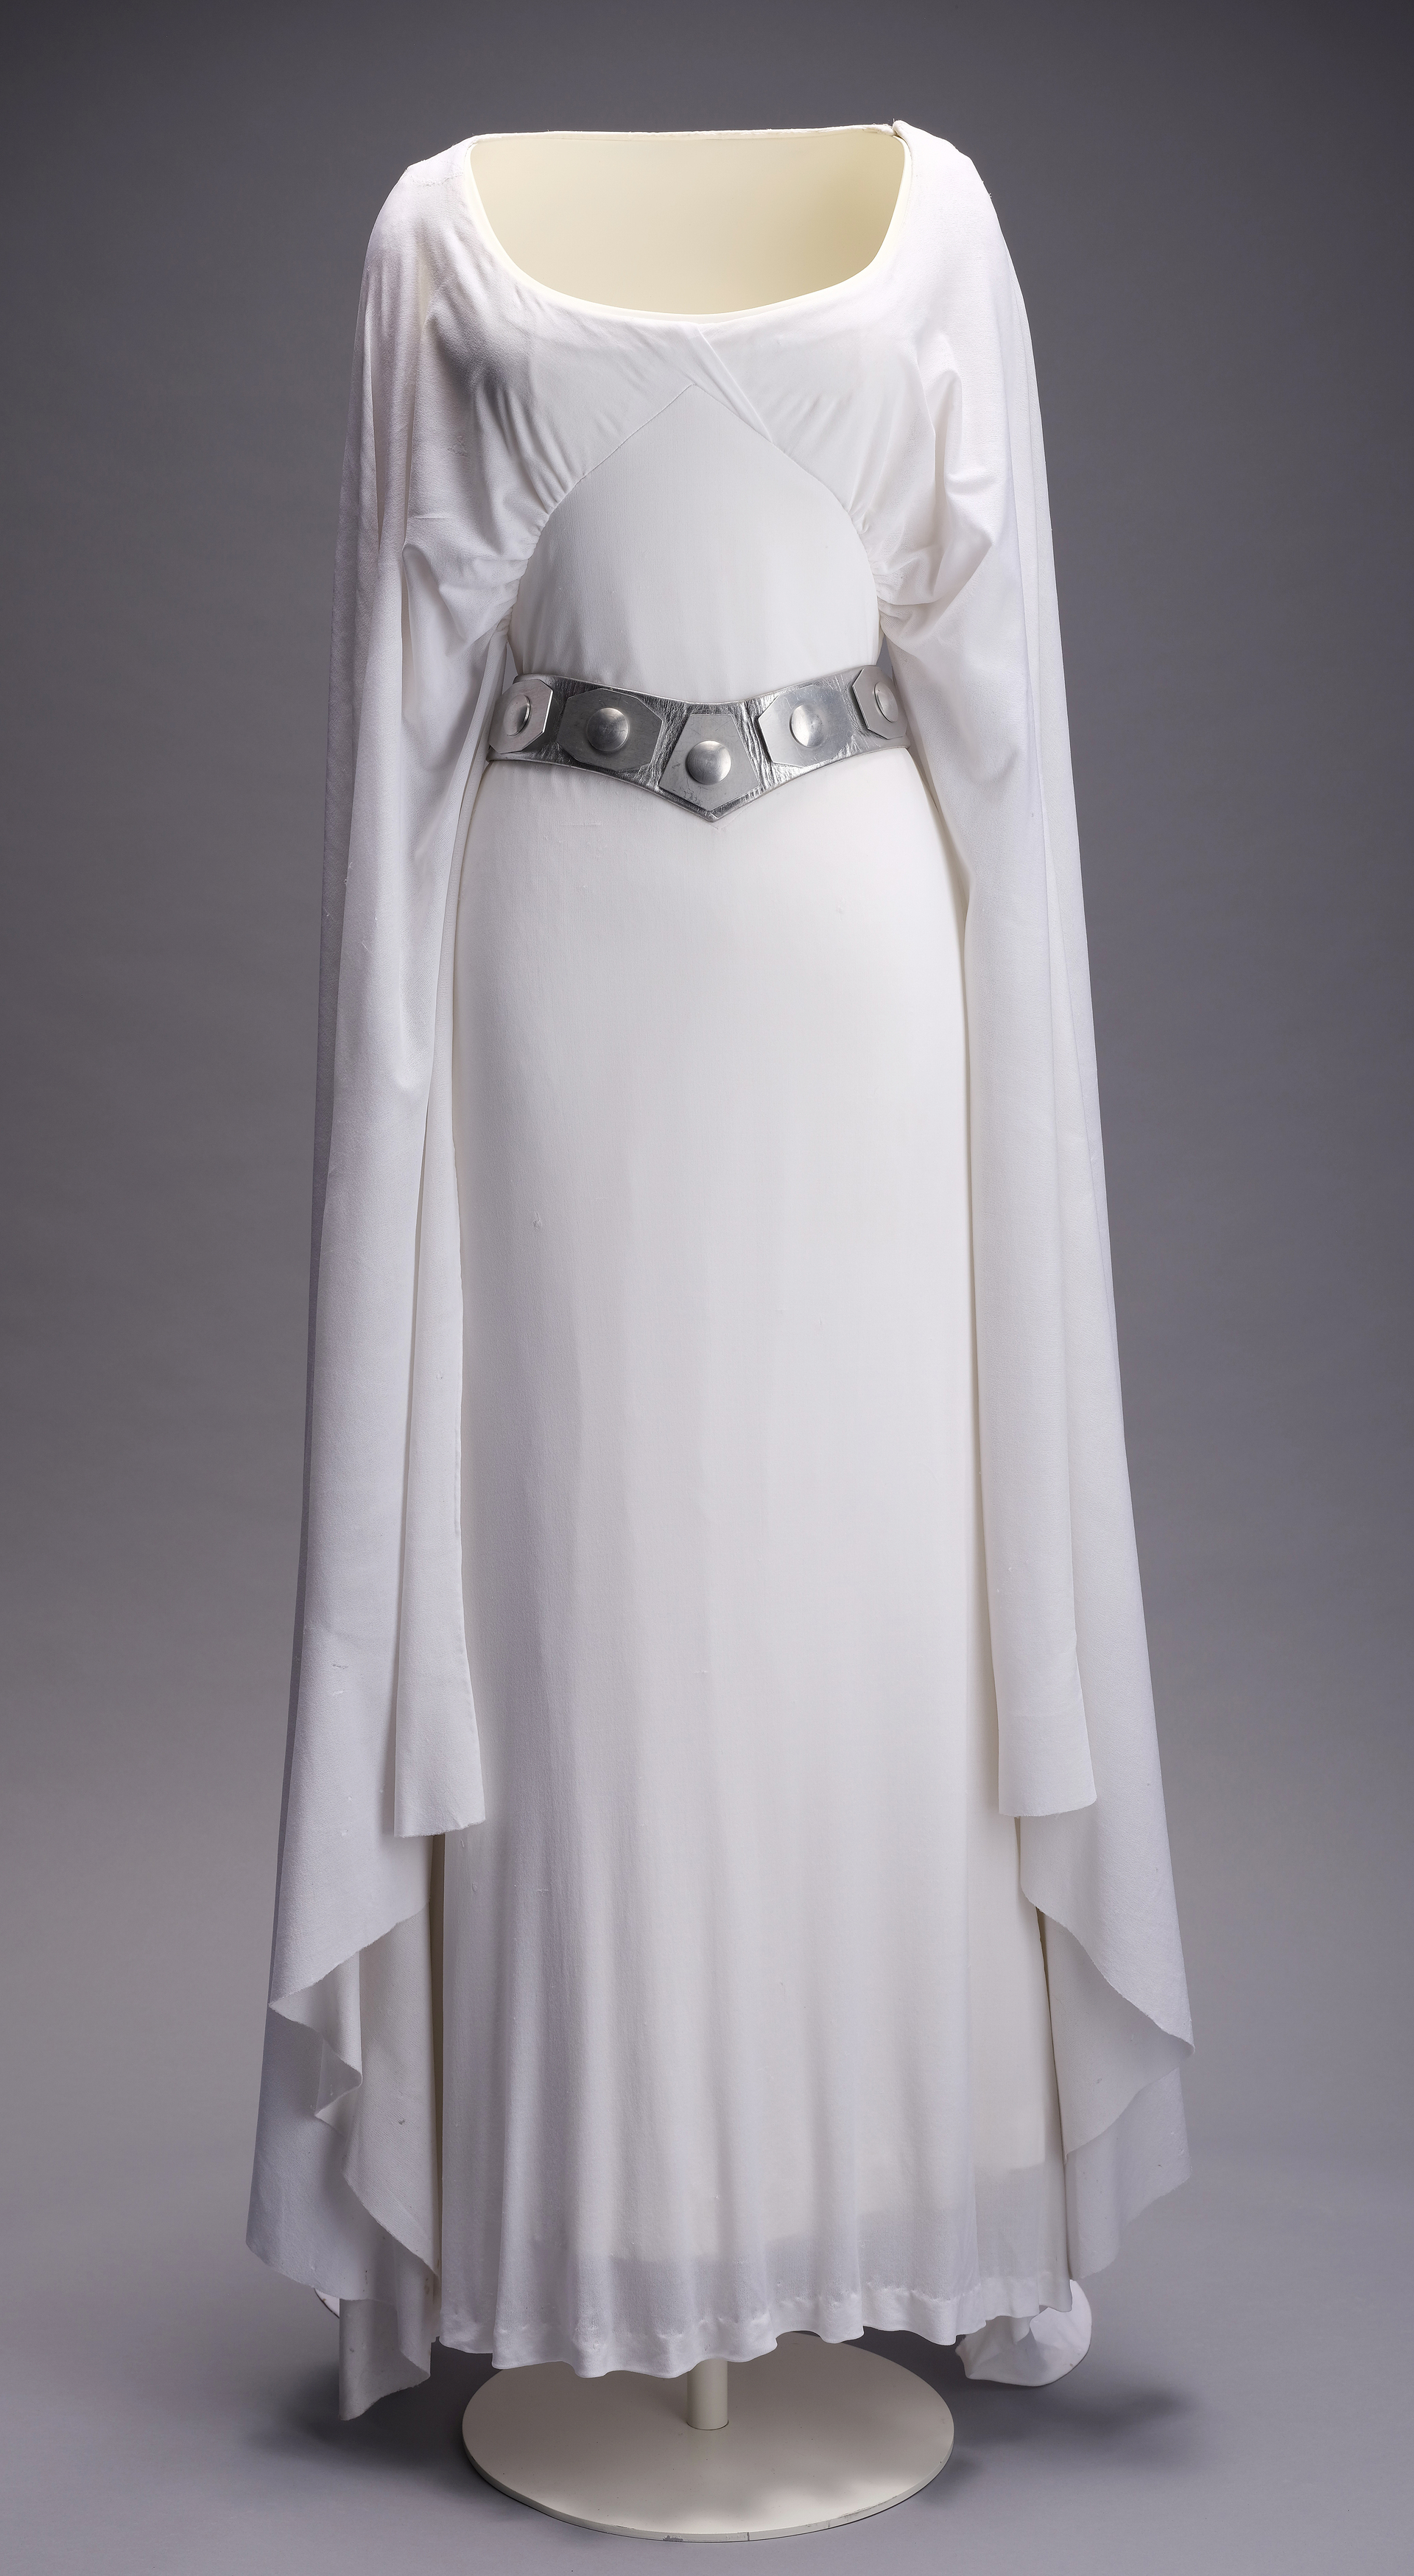 STAR WARS: A NEW HOPE (1977) - Princess Leia's (Carrie Fisher) Screen-Matched Ceremonial Dress